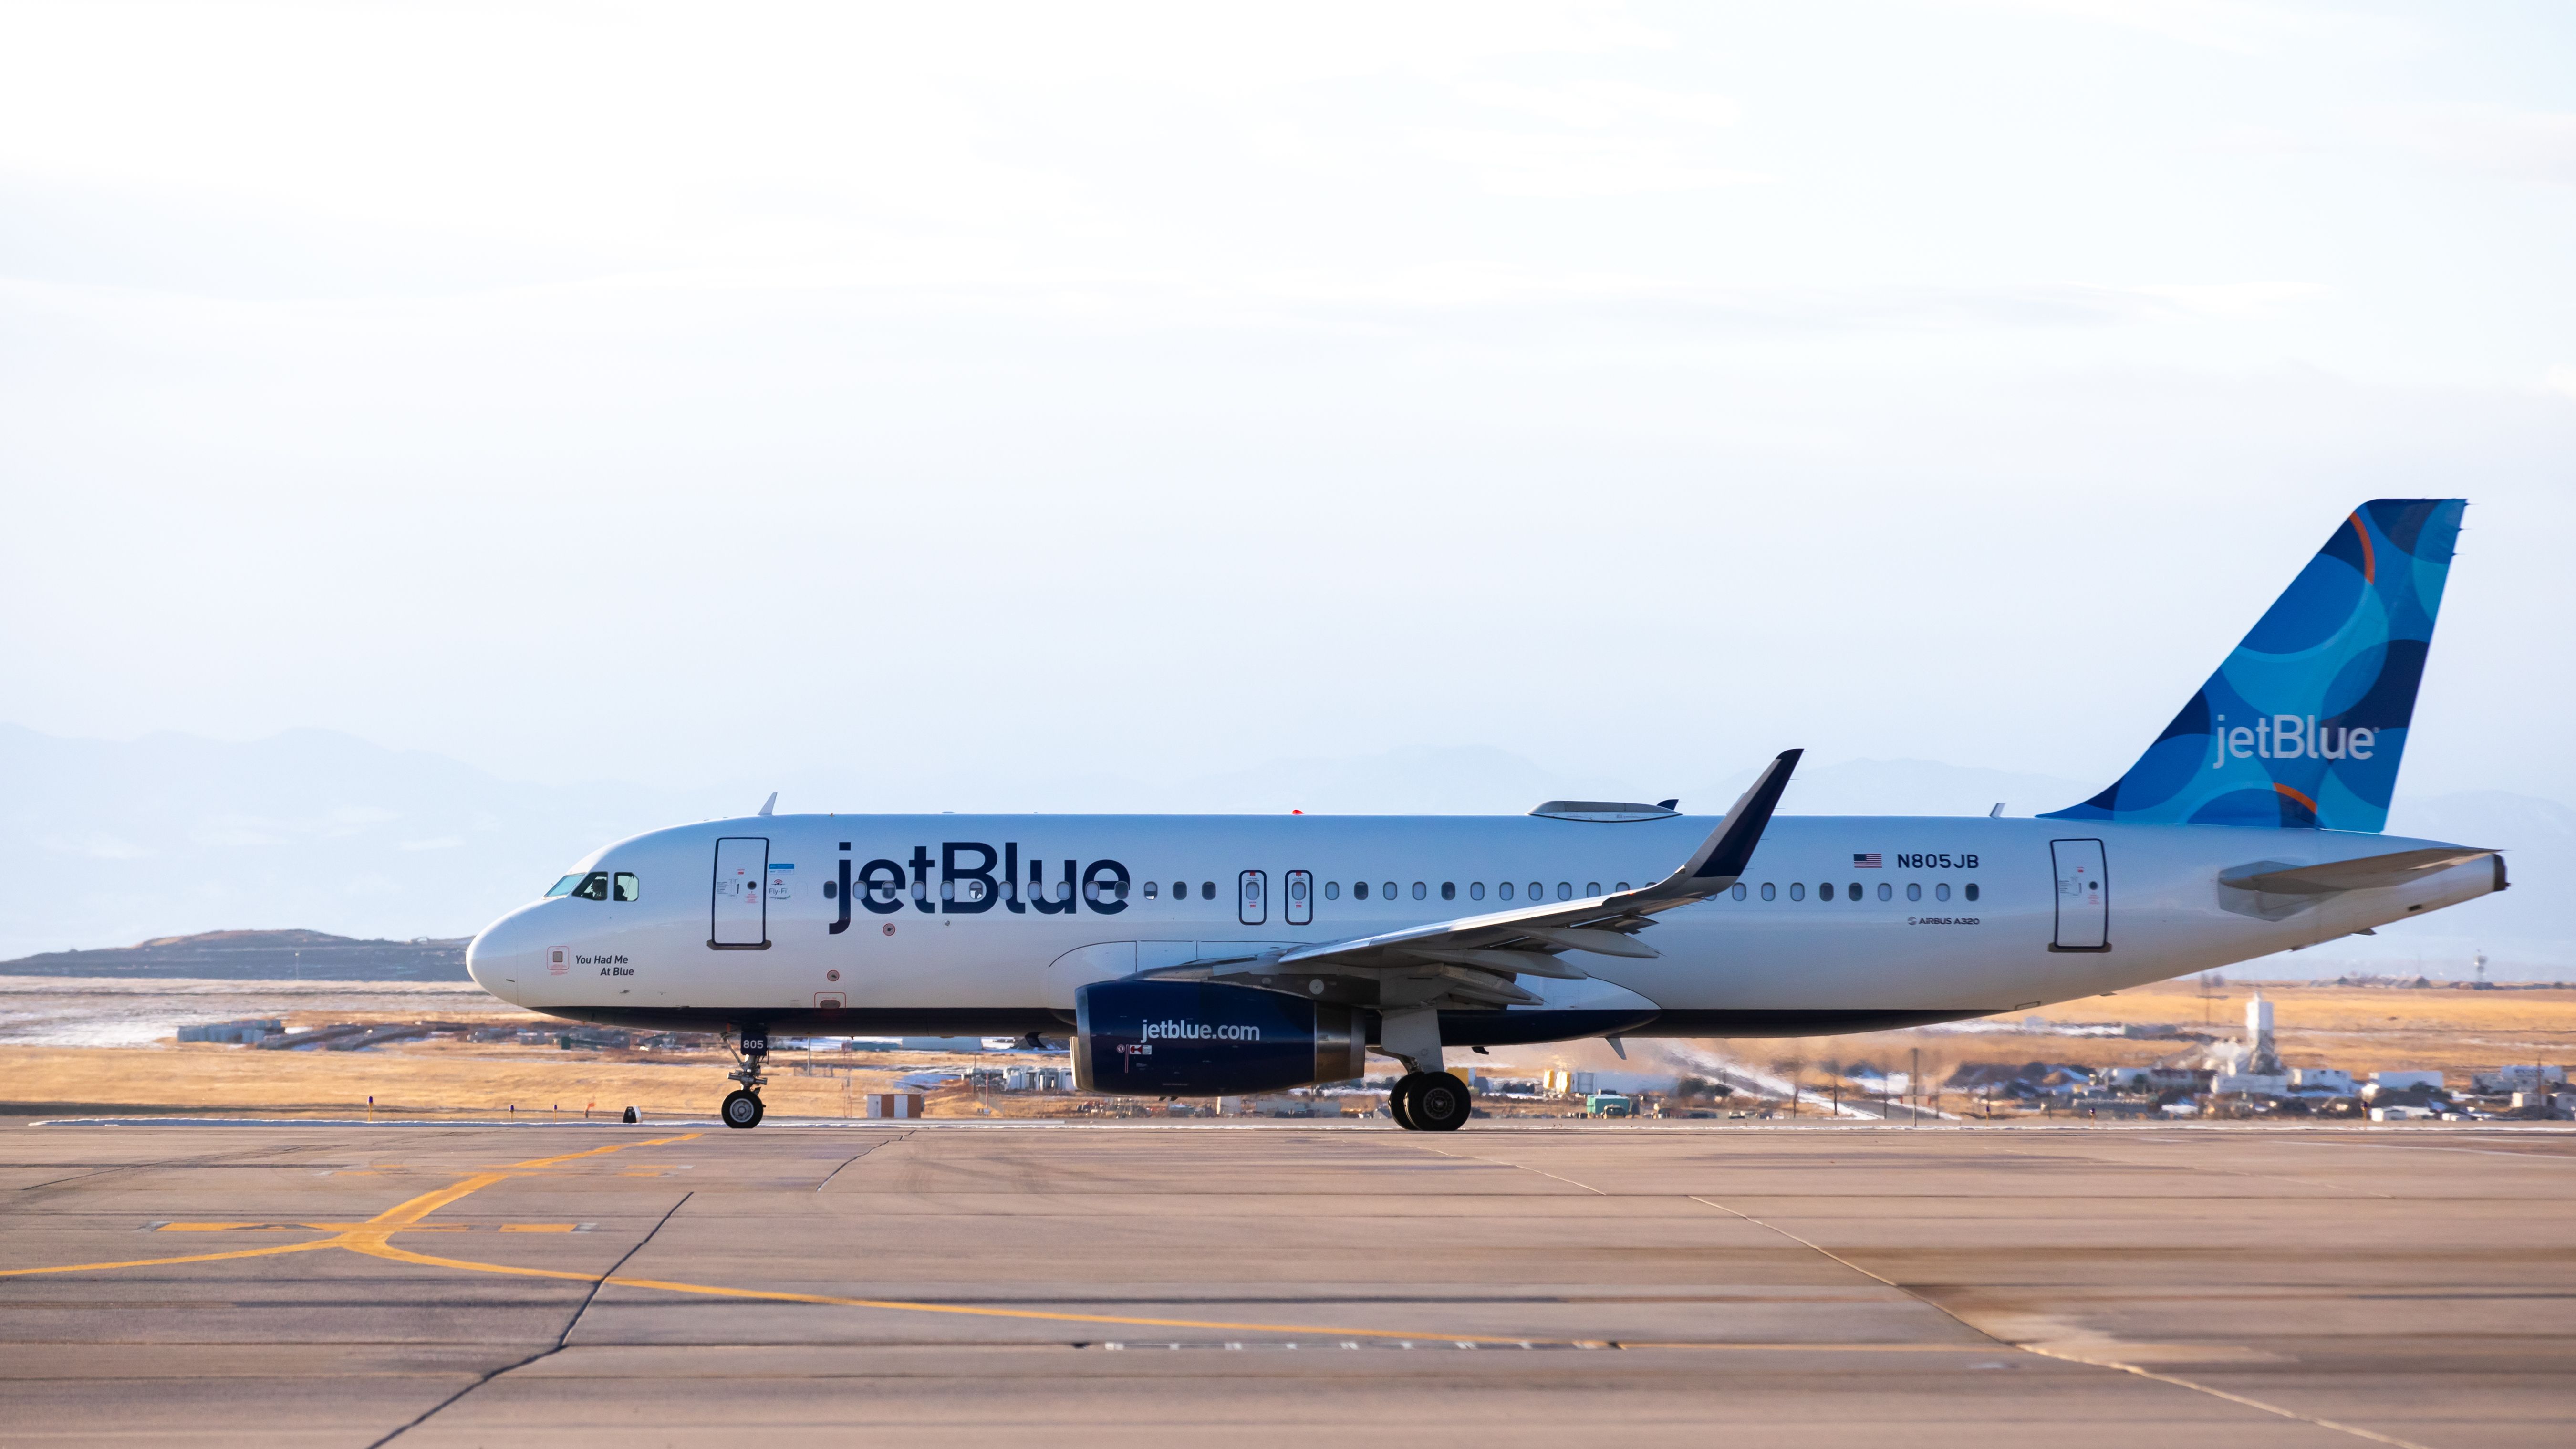 JetBlue Airbus A320 on taxiway